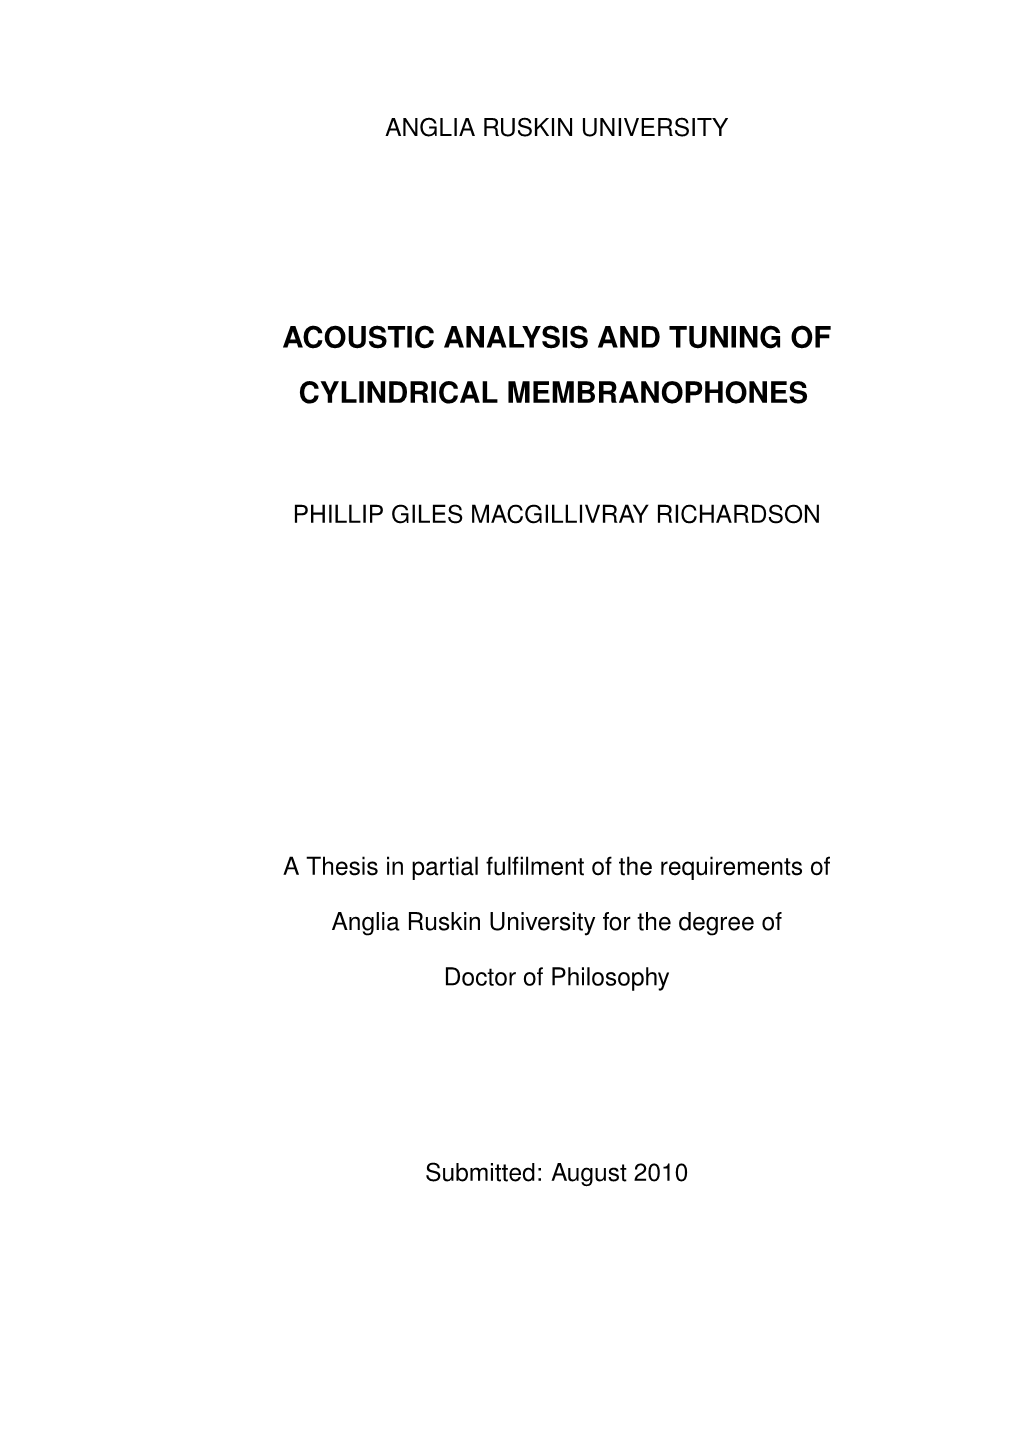 Acoustic Analysis and Tuning of Cylindrical Membranophones